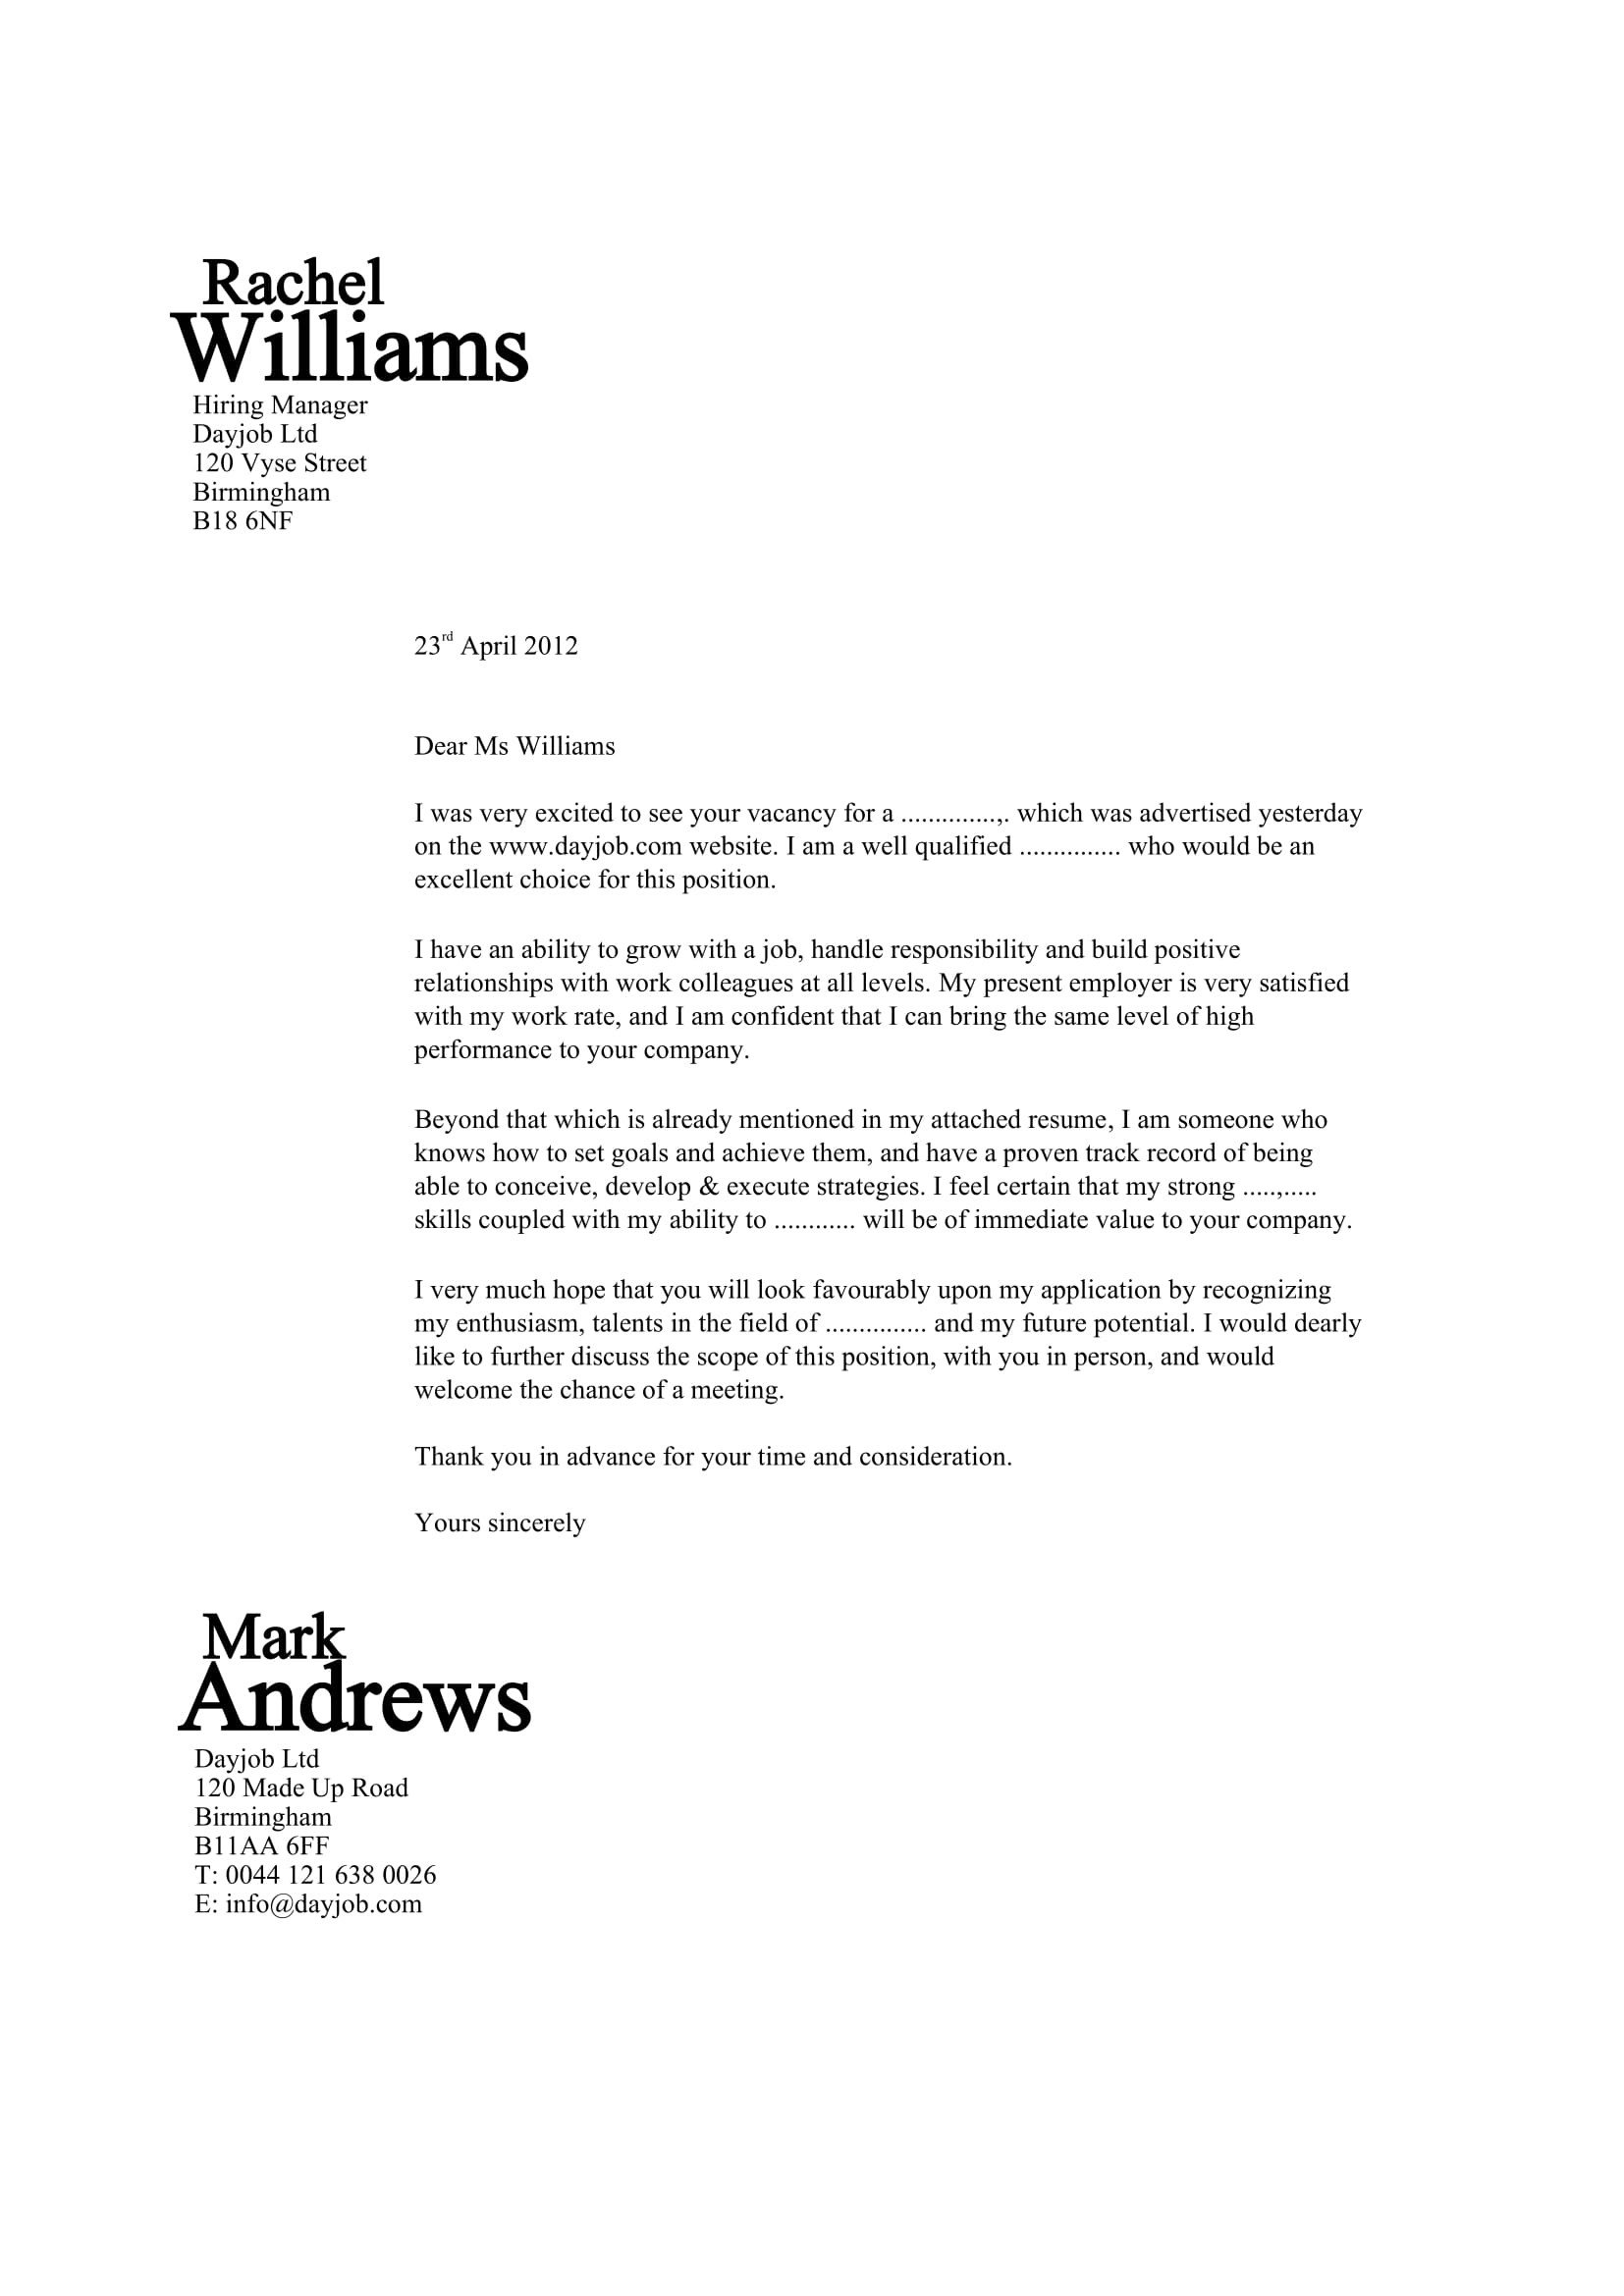 Best Cover Letter Template 32 Best Sample Cover Letter Examples for Job Applicants